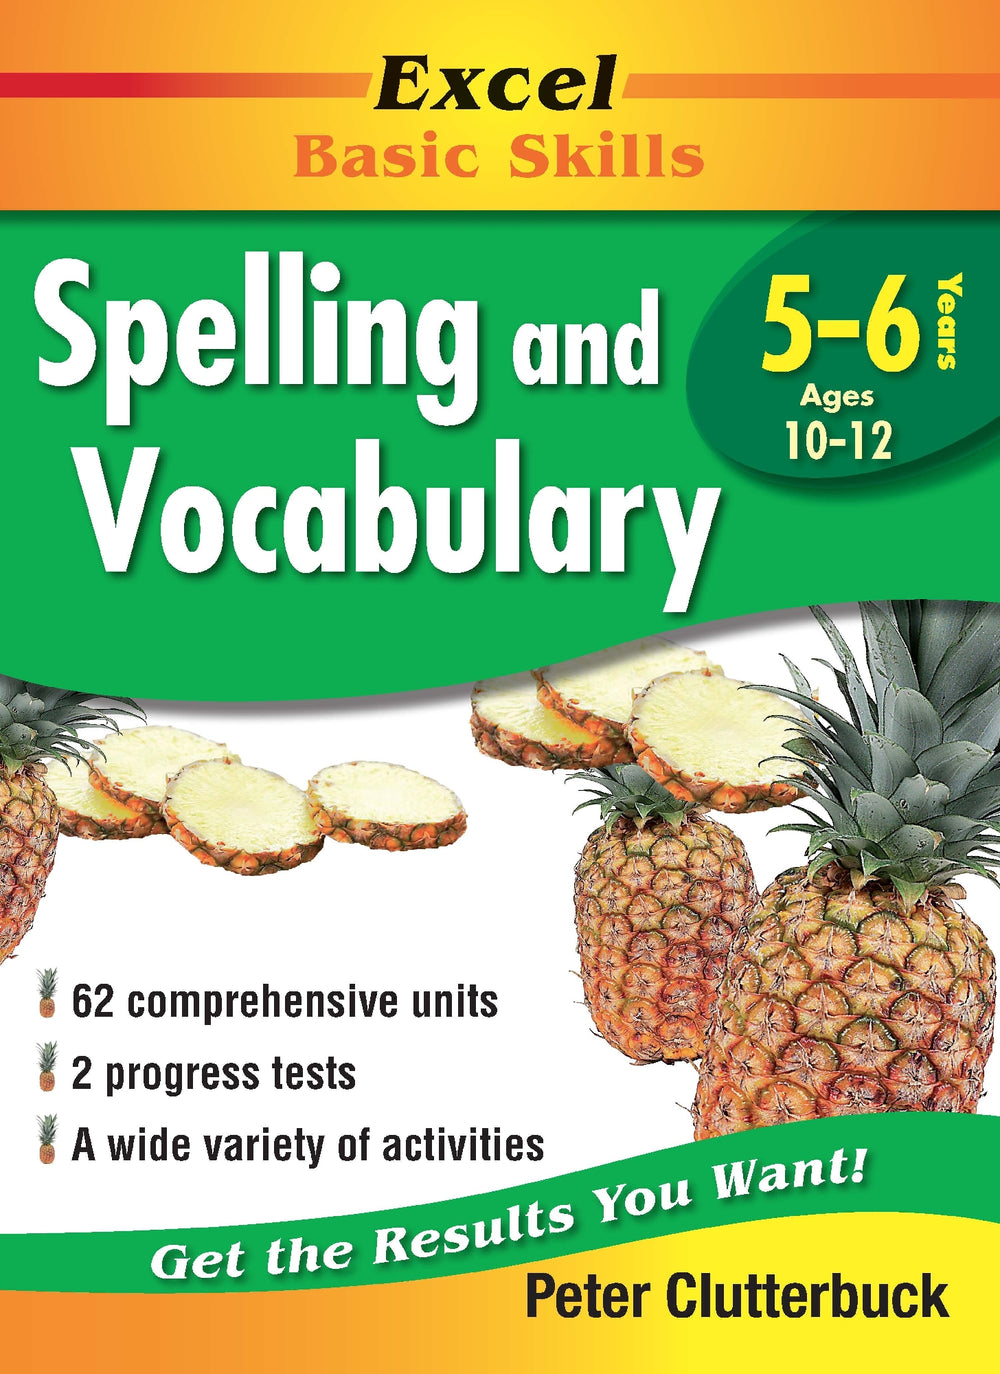 Excel Basic Skills Workbook: Spelling and Vocabulary Years 5-6